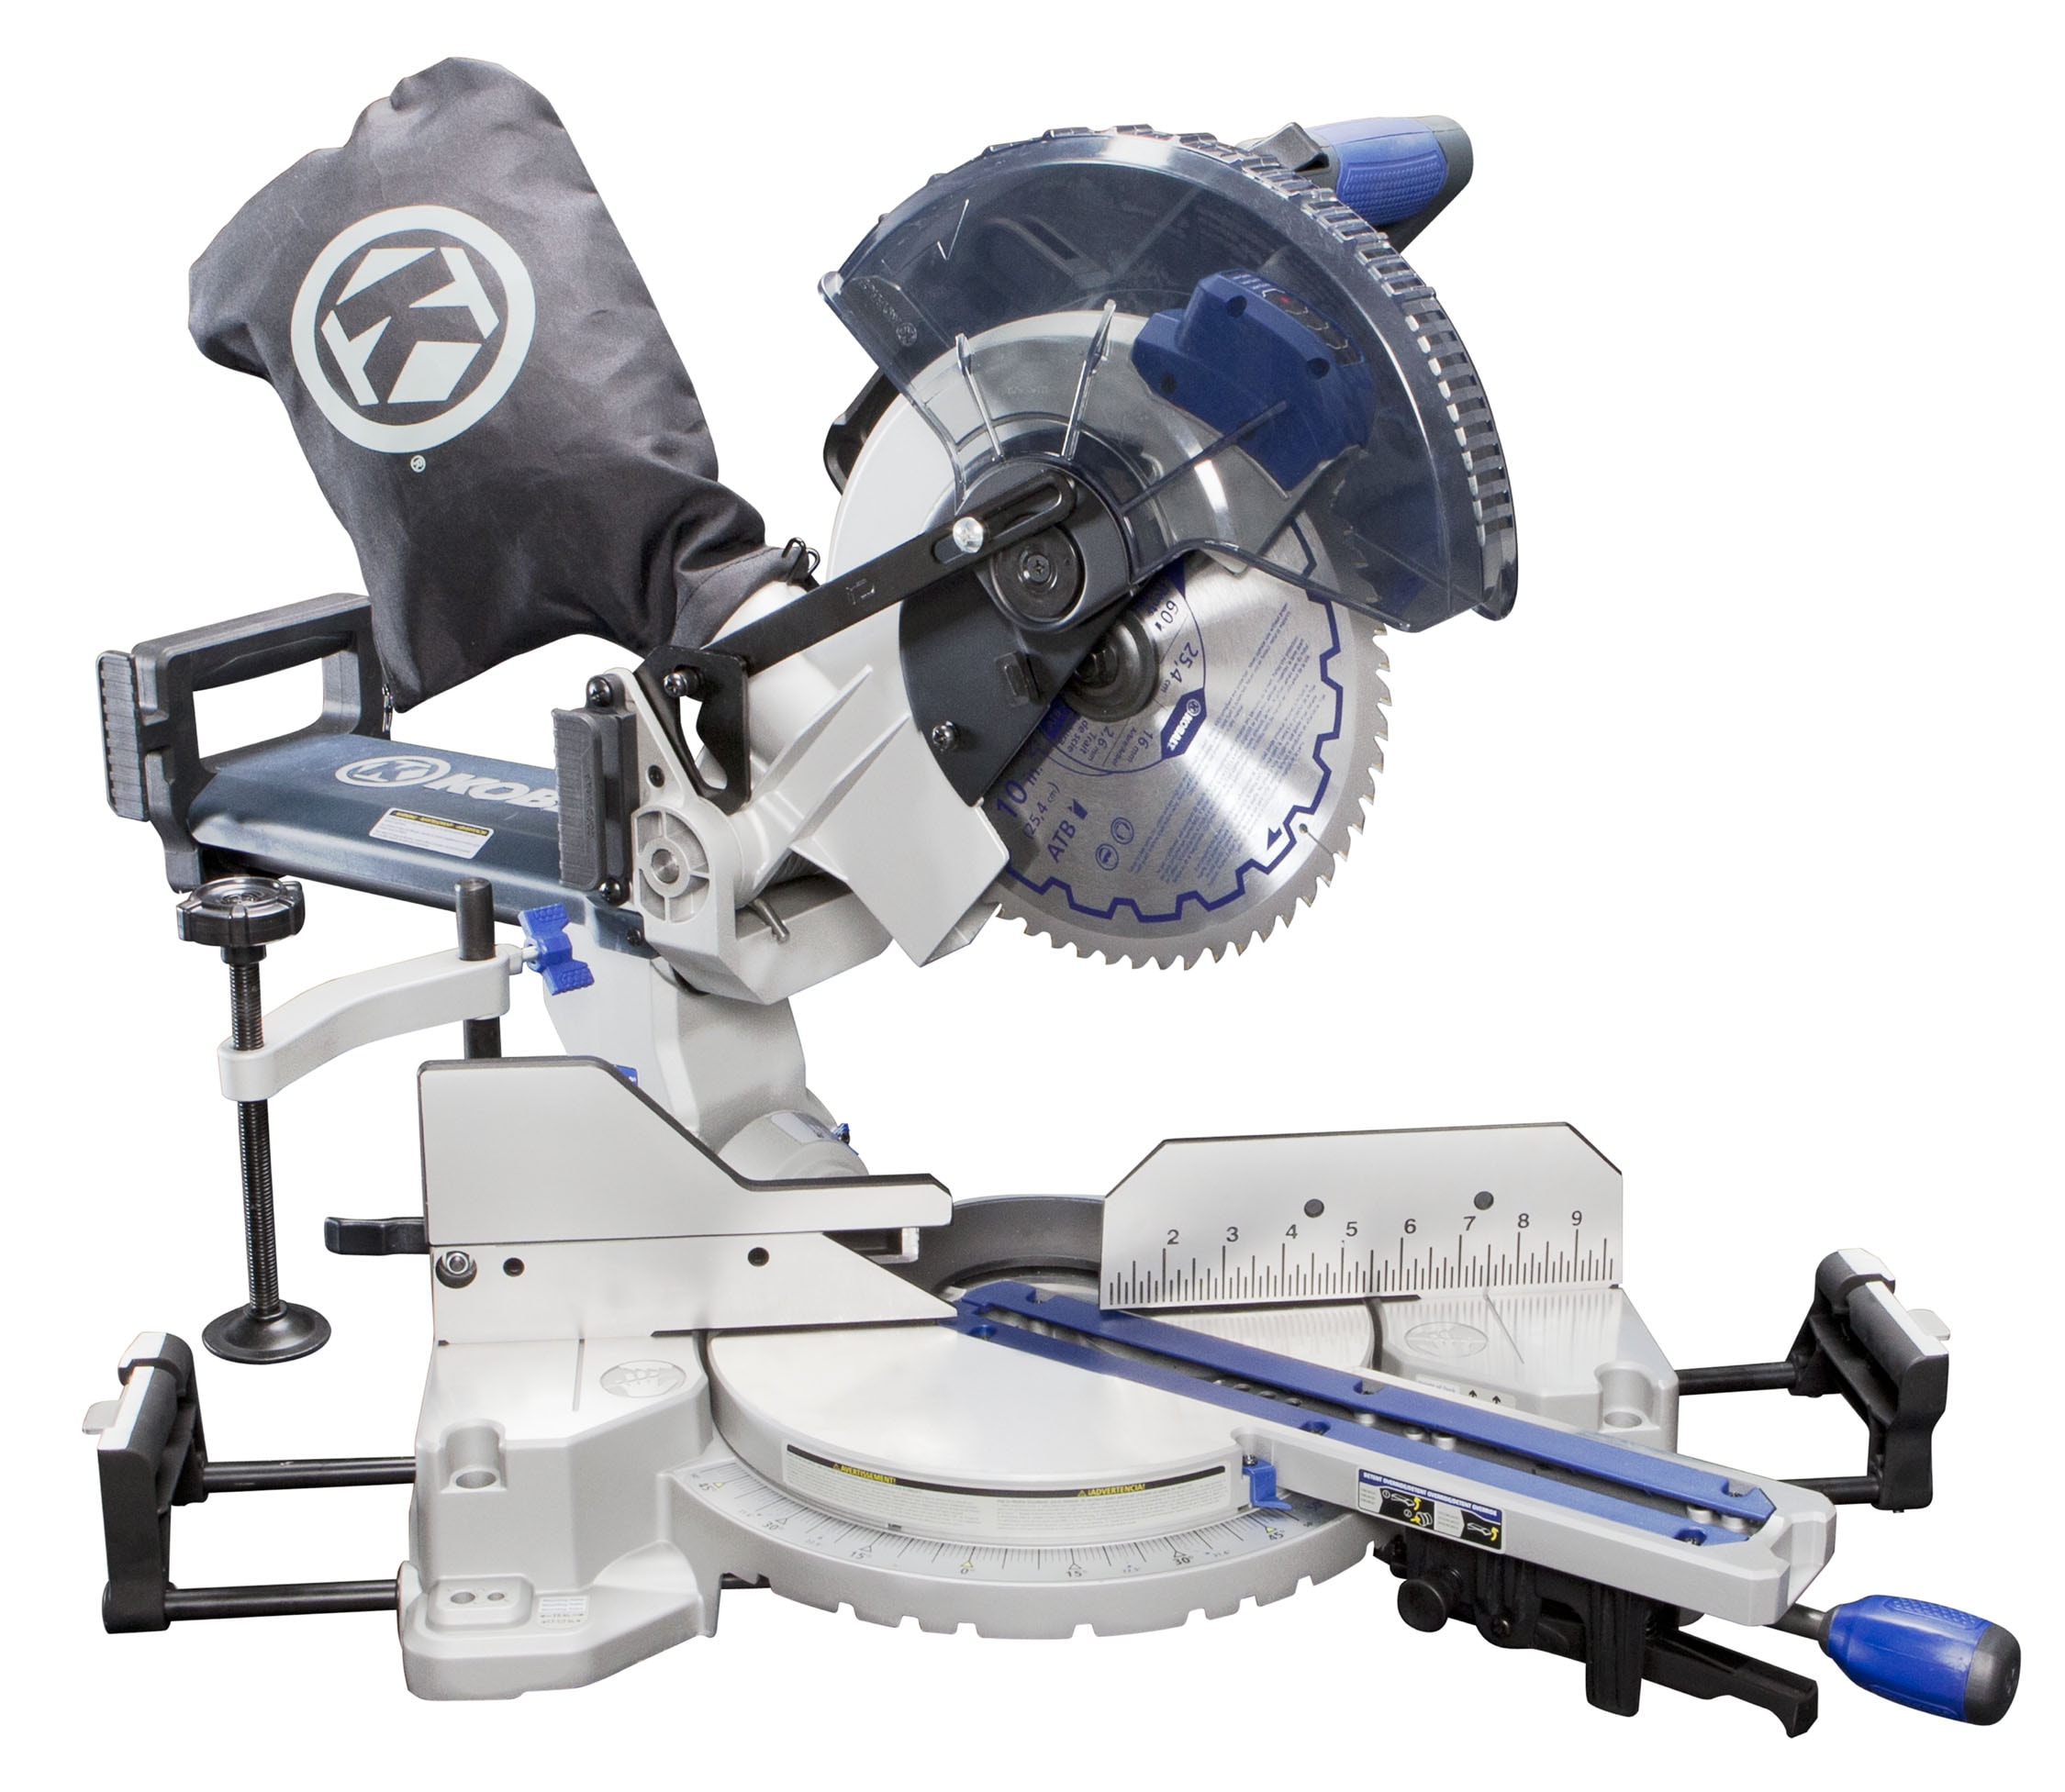 DELTA ShopMaster SM 10-in 15-Amp Single Bevel Sliding Compound Corded Miter  Saw With Laser Guide In The Miter Saws Department At